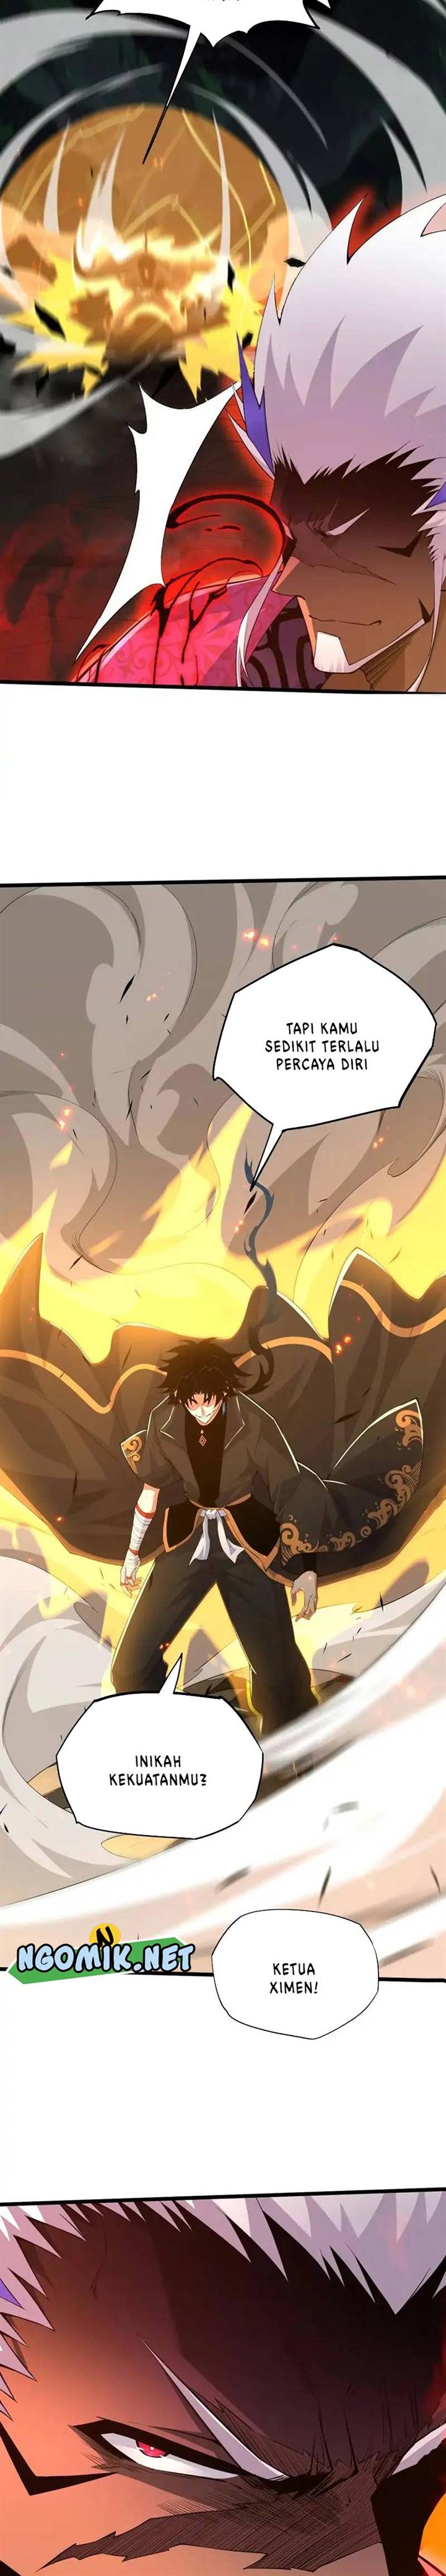 Second Fight Against the Heavens Chapter 32